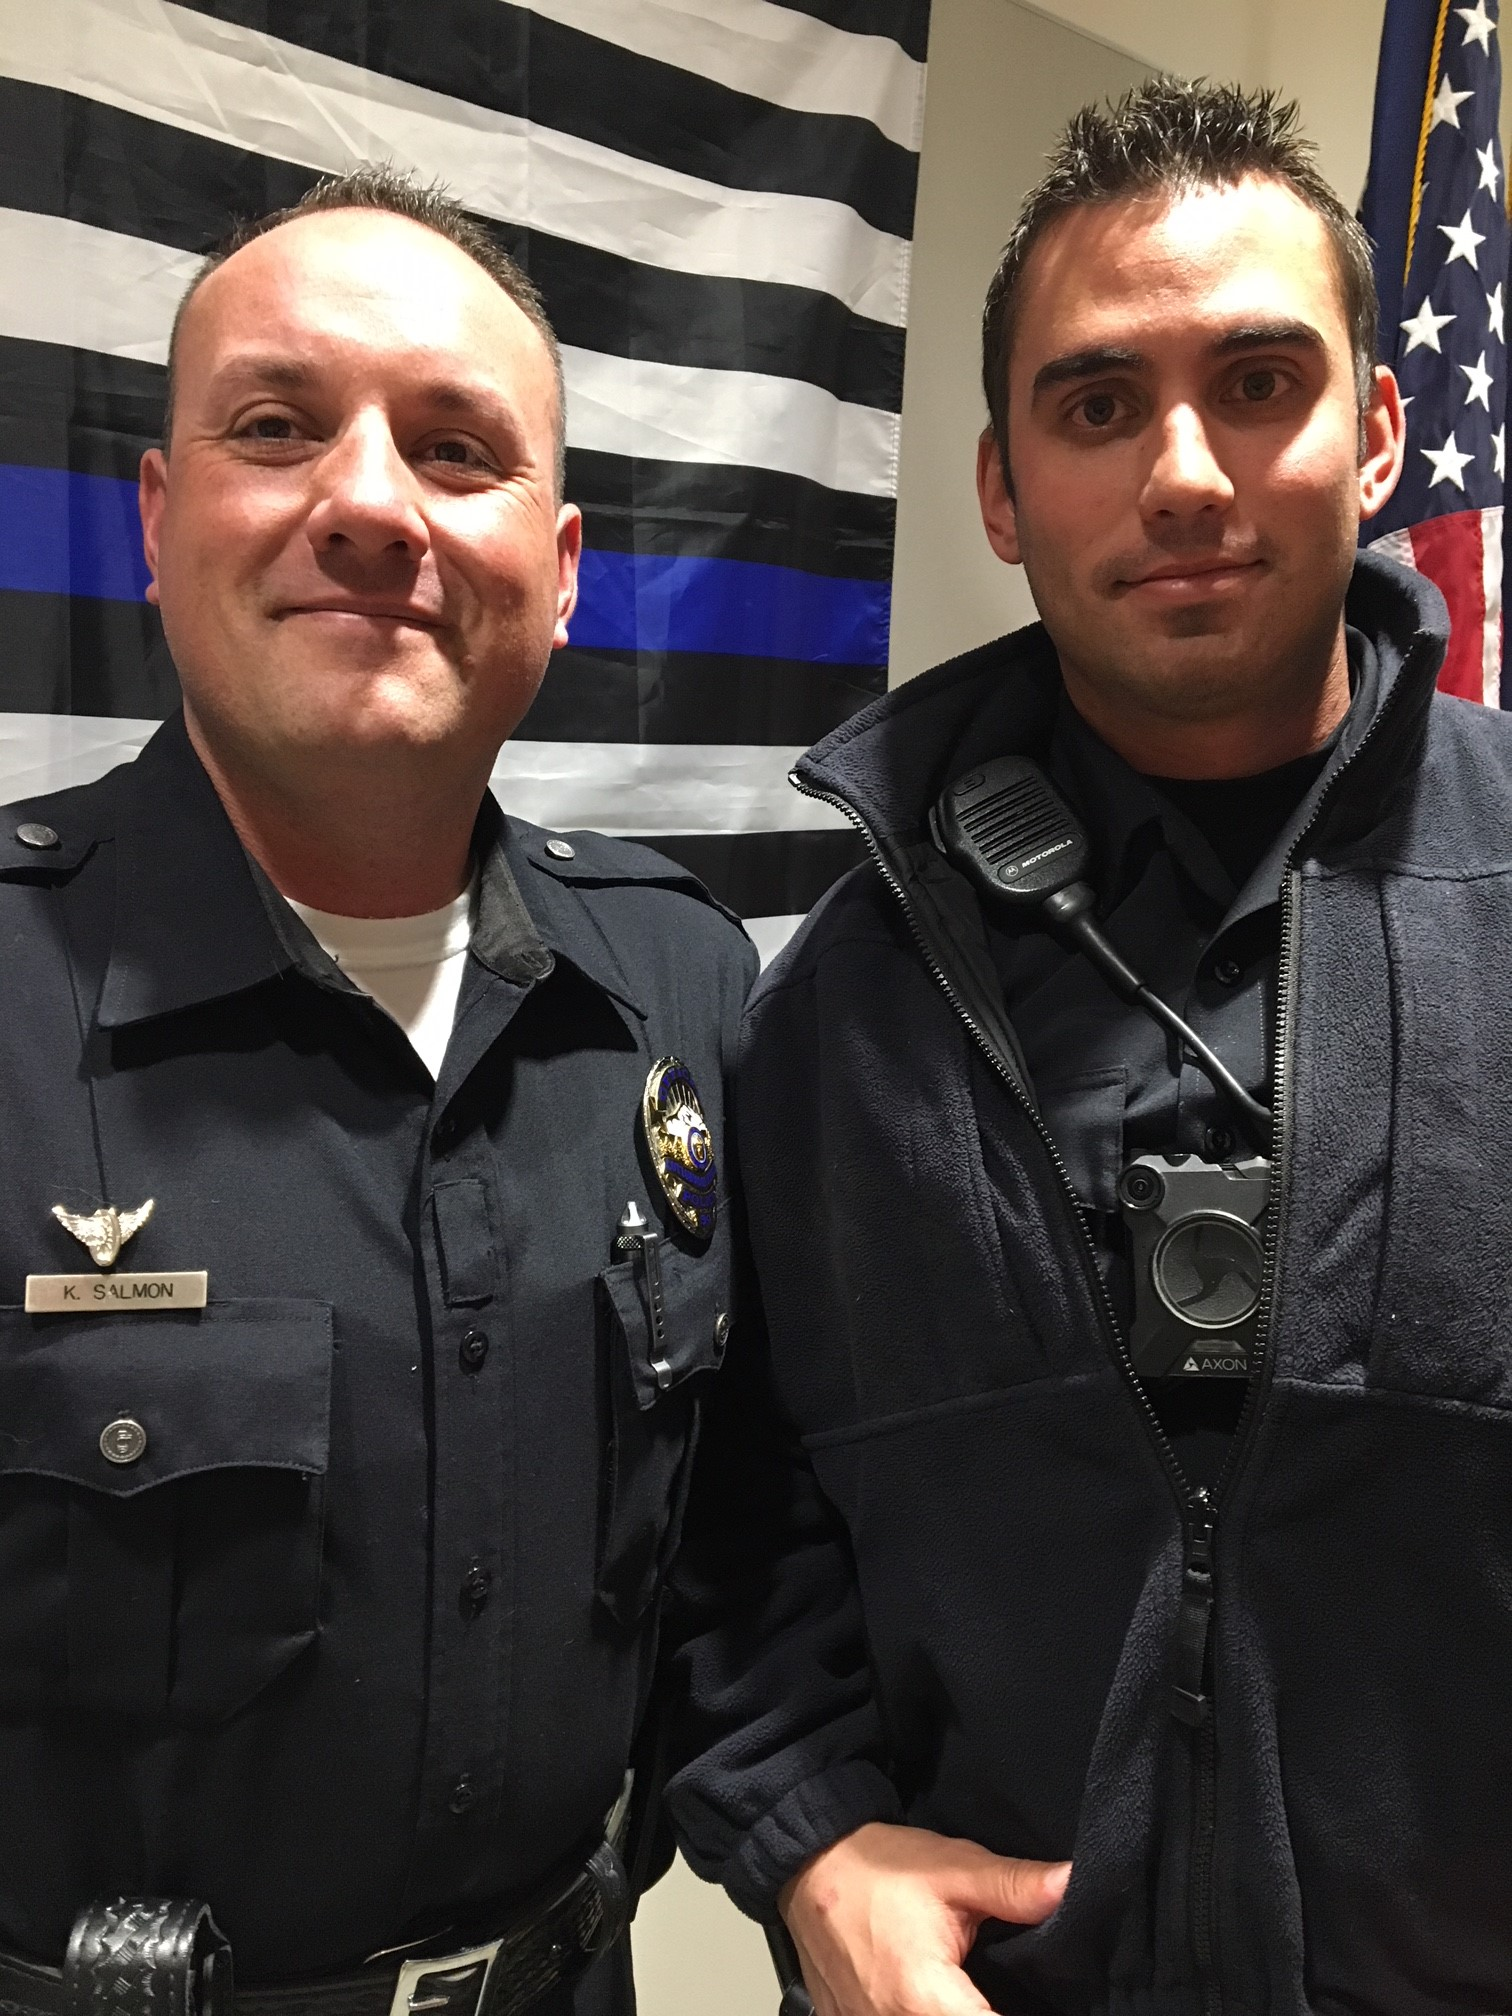 Officer Kevin Salmon and Officer Joey Incardine - Cottonwood Heights Police Department